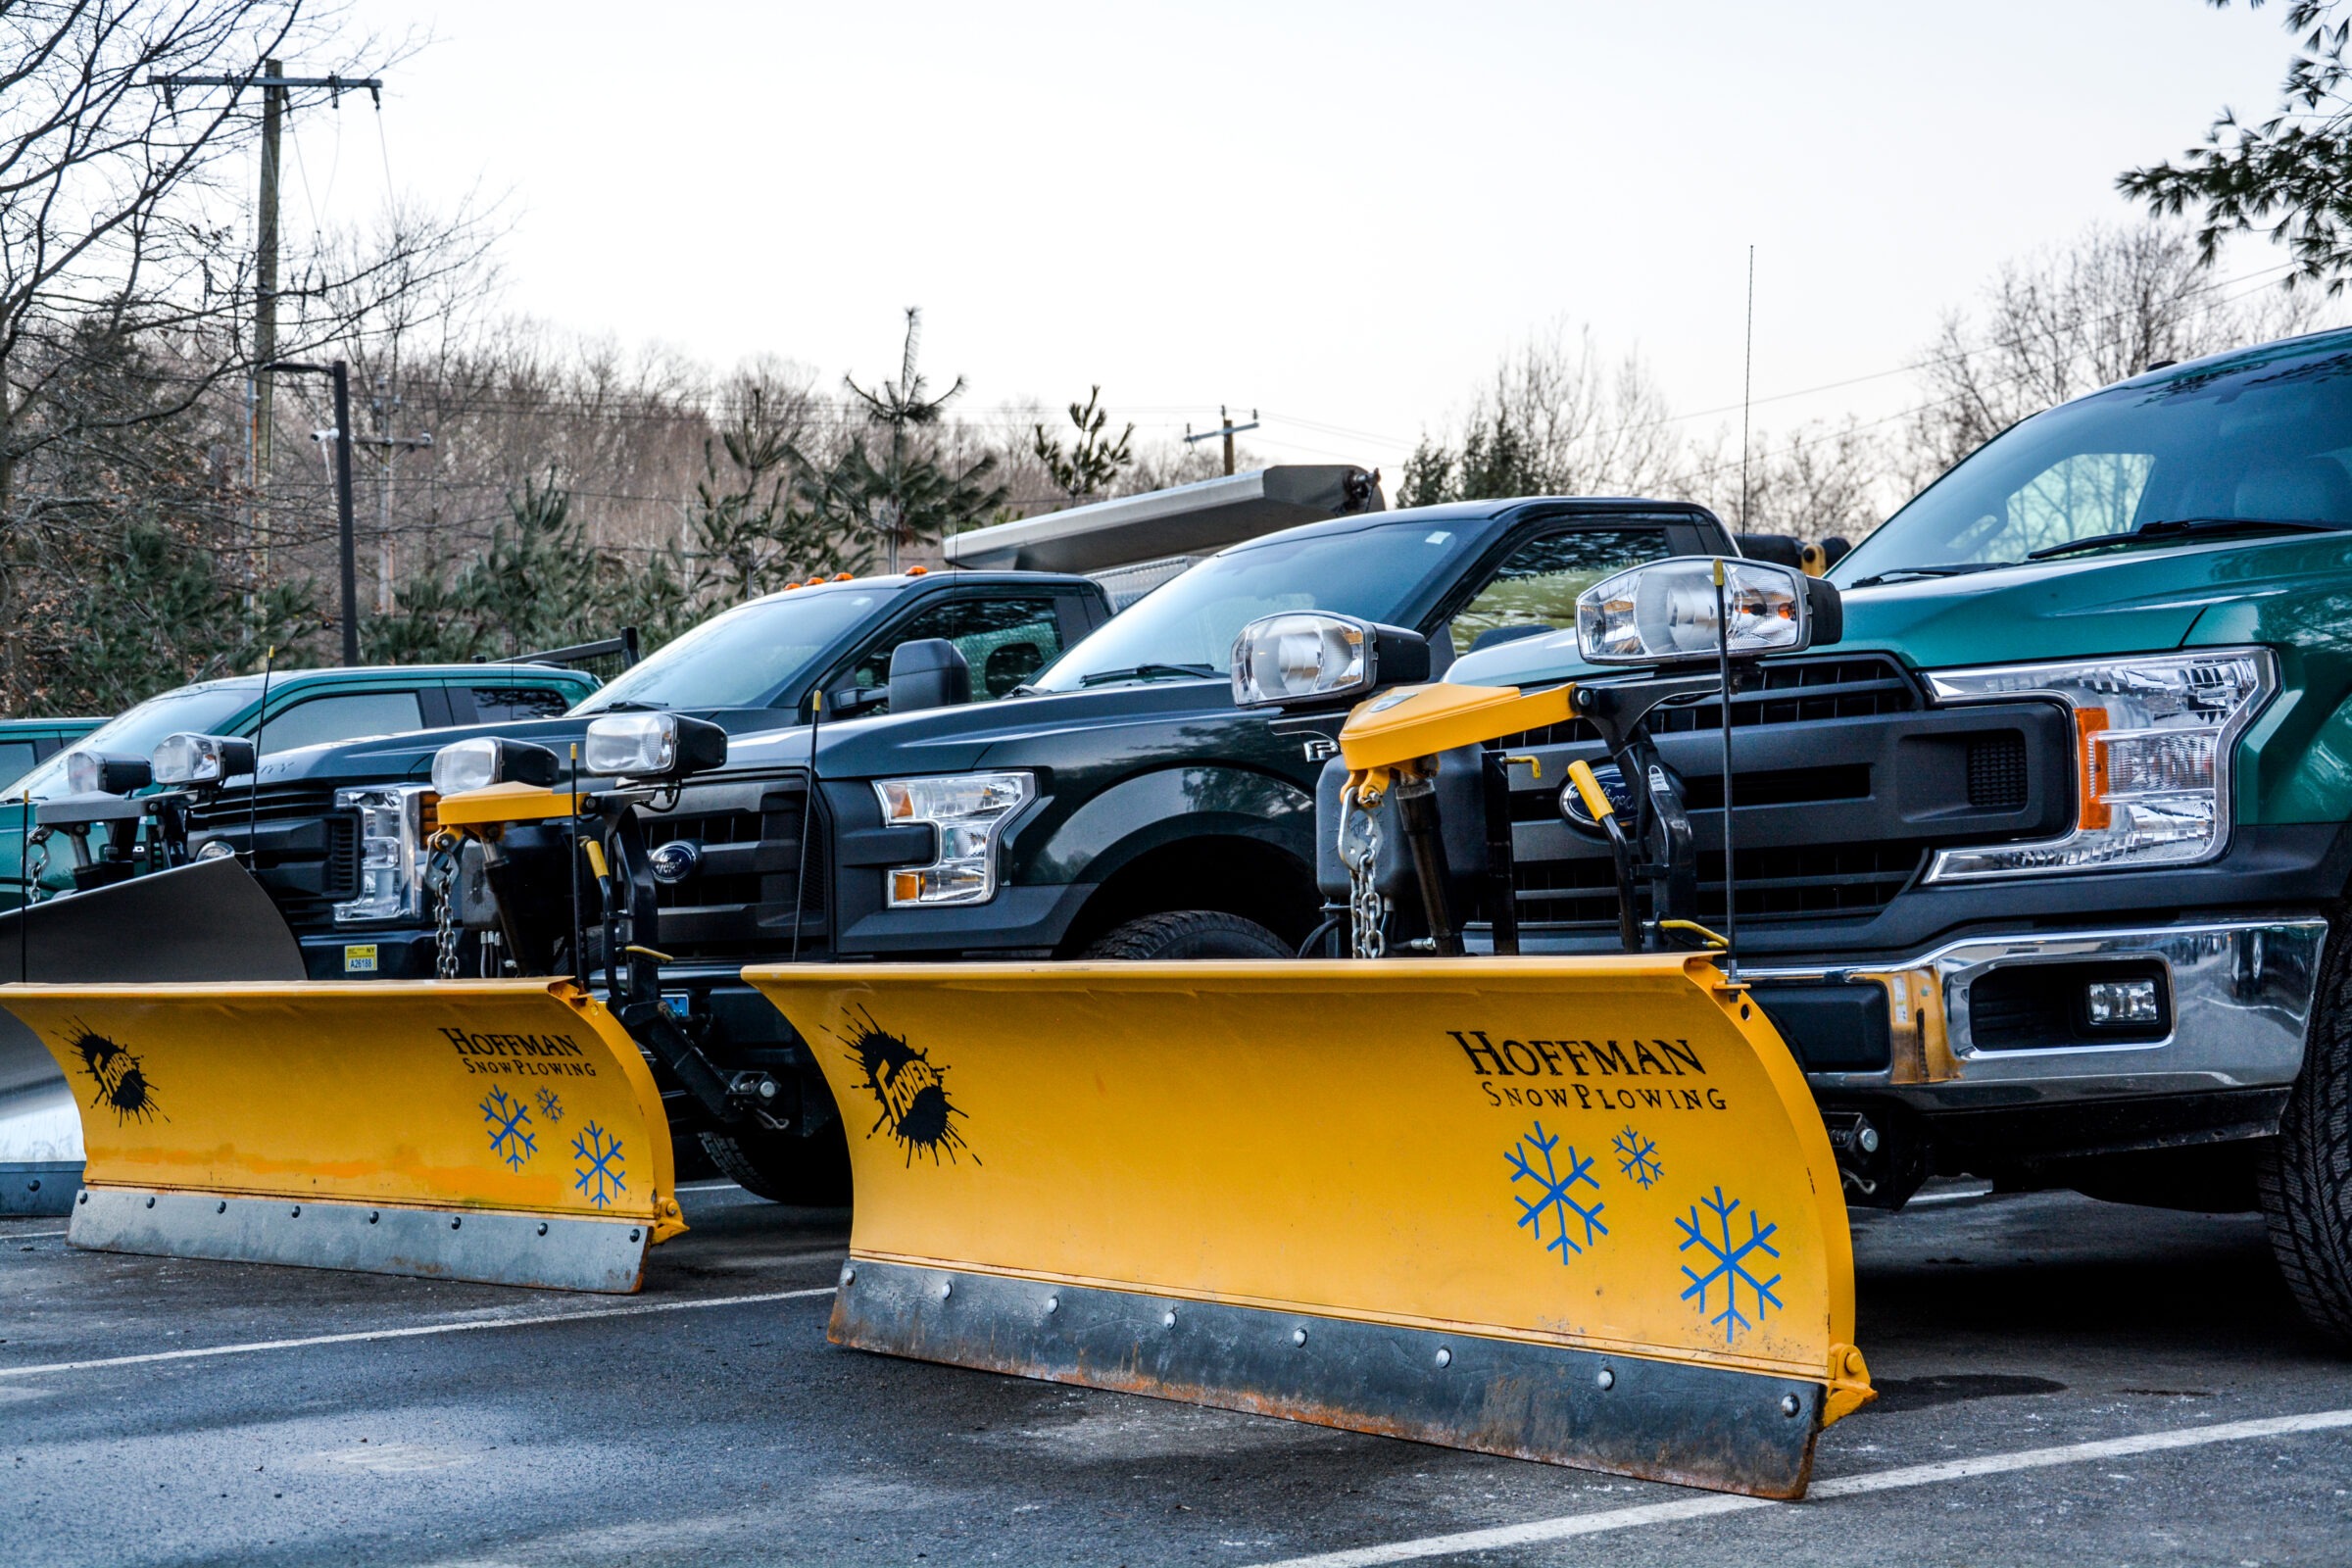 A row of parked pickup trucks equipped with yellow snowplow attachments, displaying the words "Hoffman Snowplowing" and snowflake graphics, ready for winter service.